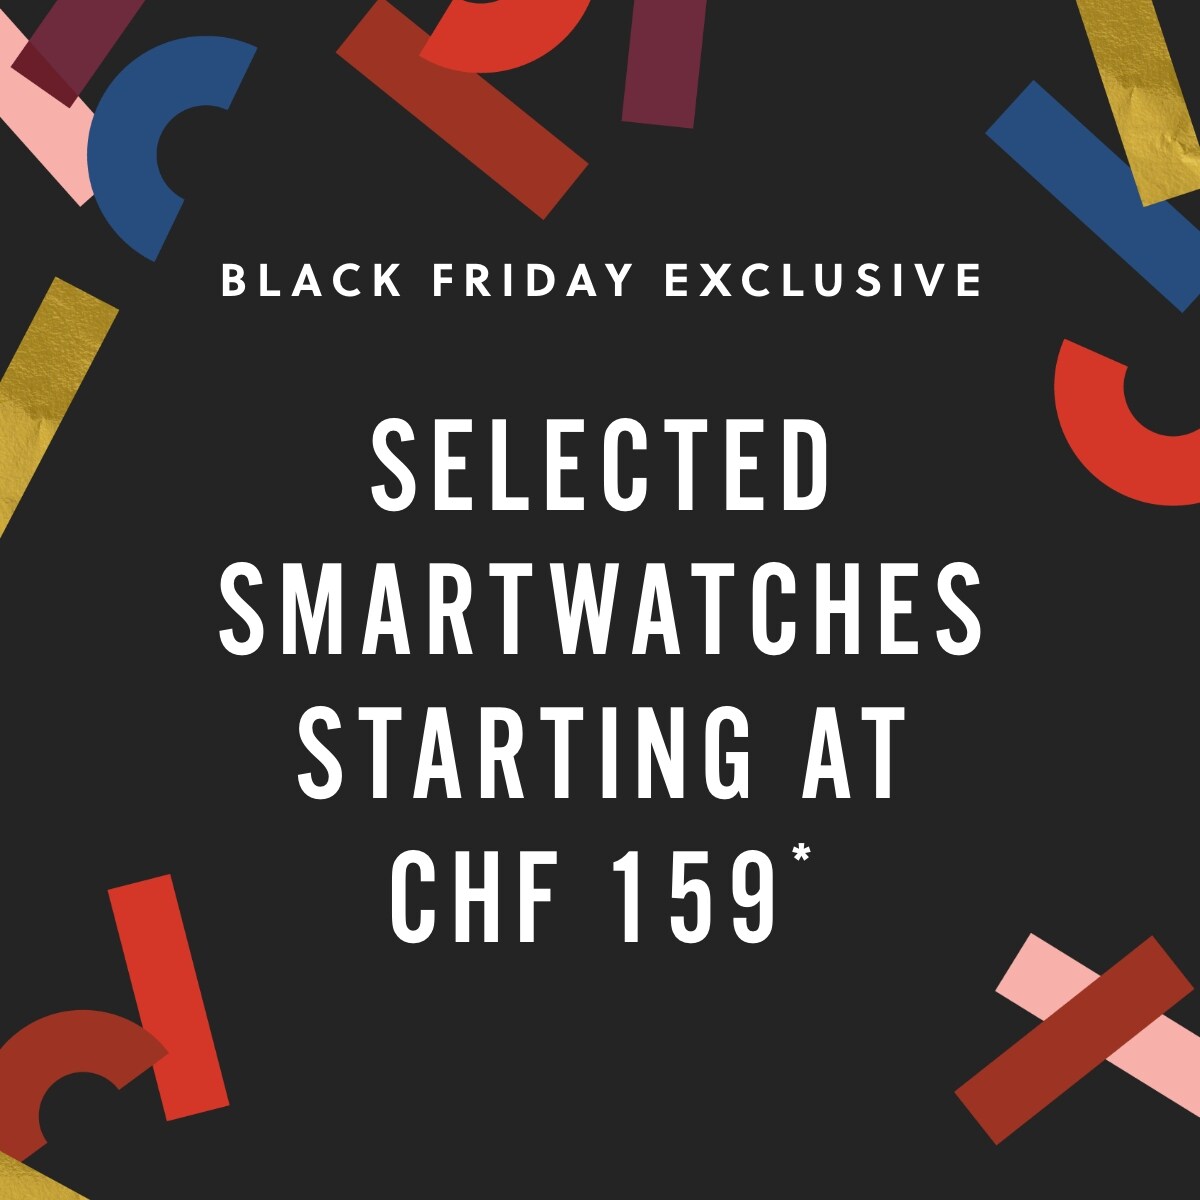 BLACK FRIDAY EXCLUSIVE SELECTED SMARTWATCHES STARTING AT CHF 159*